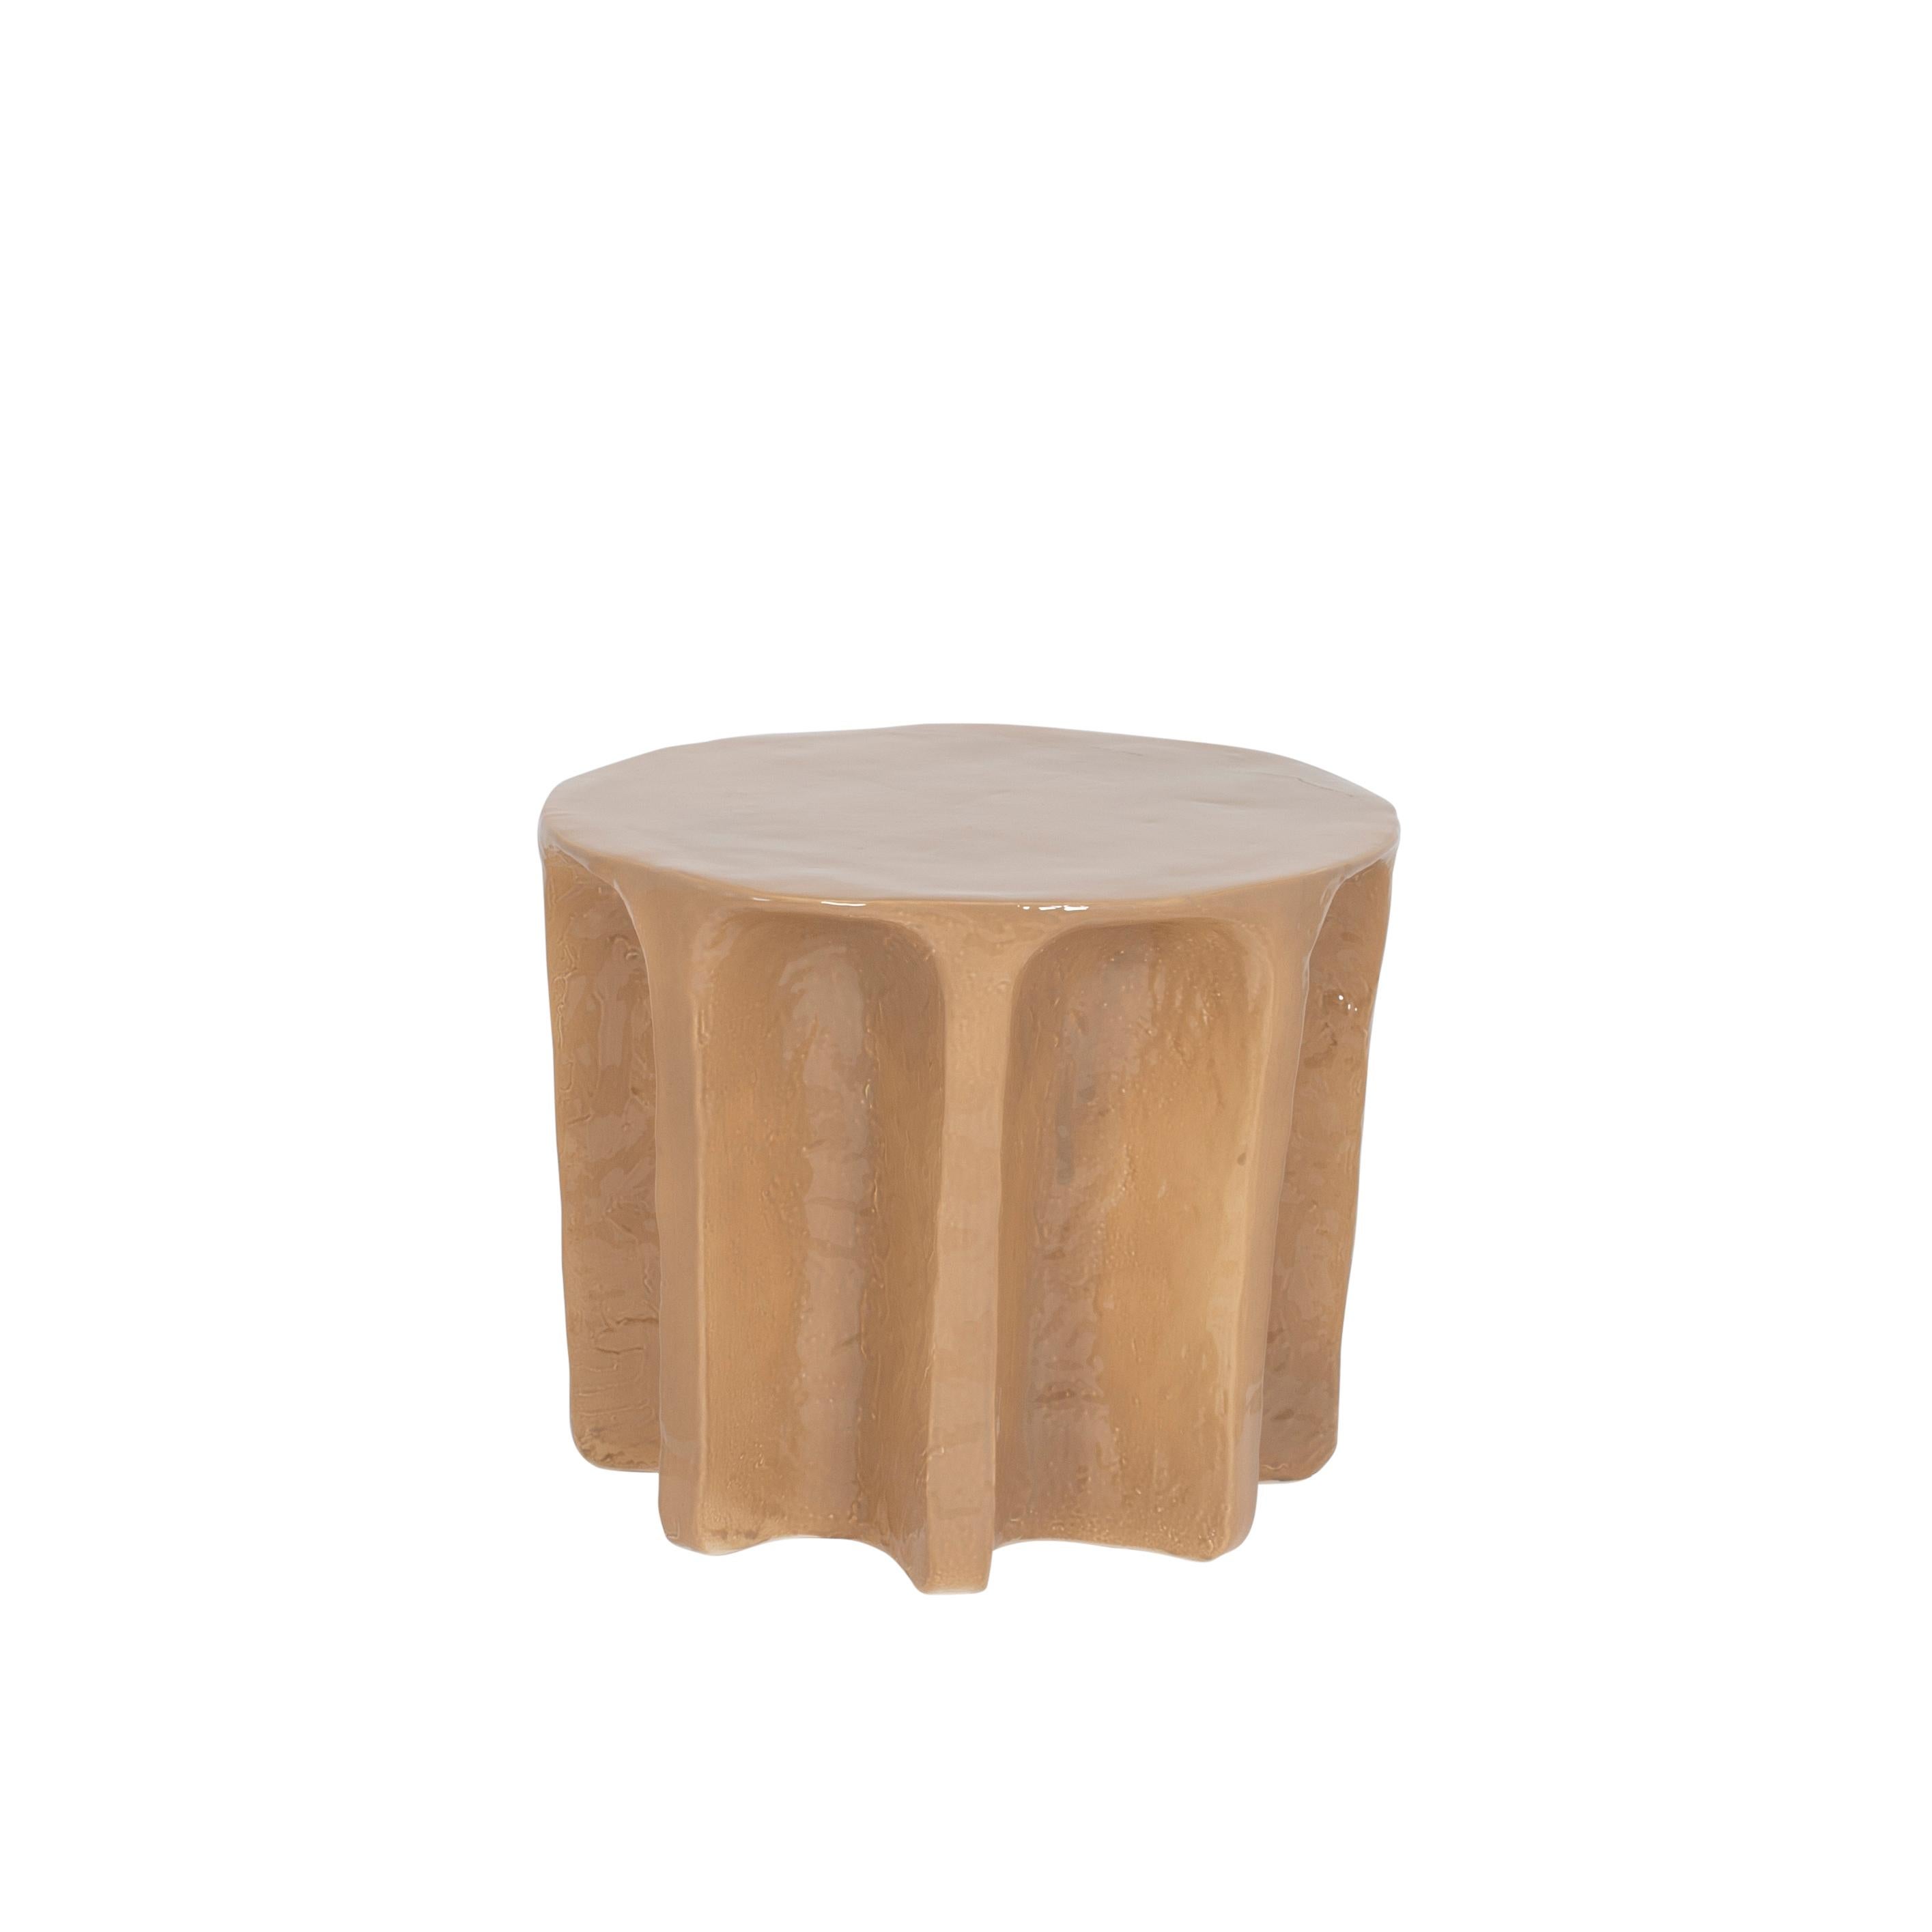 Chouchou round tobacco coffee table by Pulpo
Dimensions: D55 x H45 cm
Materials: ceramic

Also available in different colours. 

Chouchou bears the contours of an antique column – which, knowing designer Lorenzo Zanovello’s, is most likely a